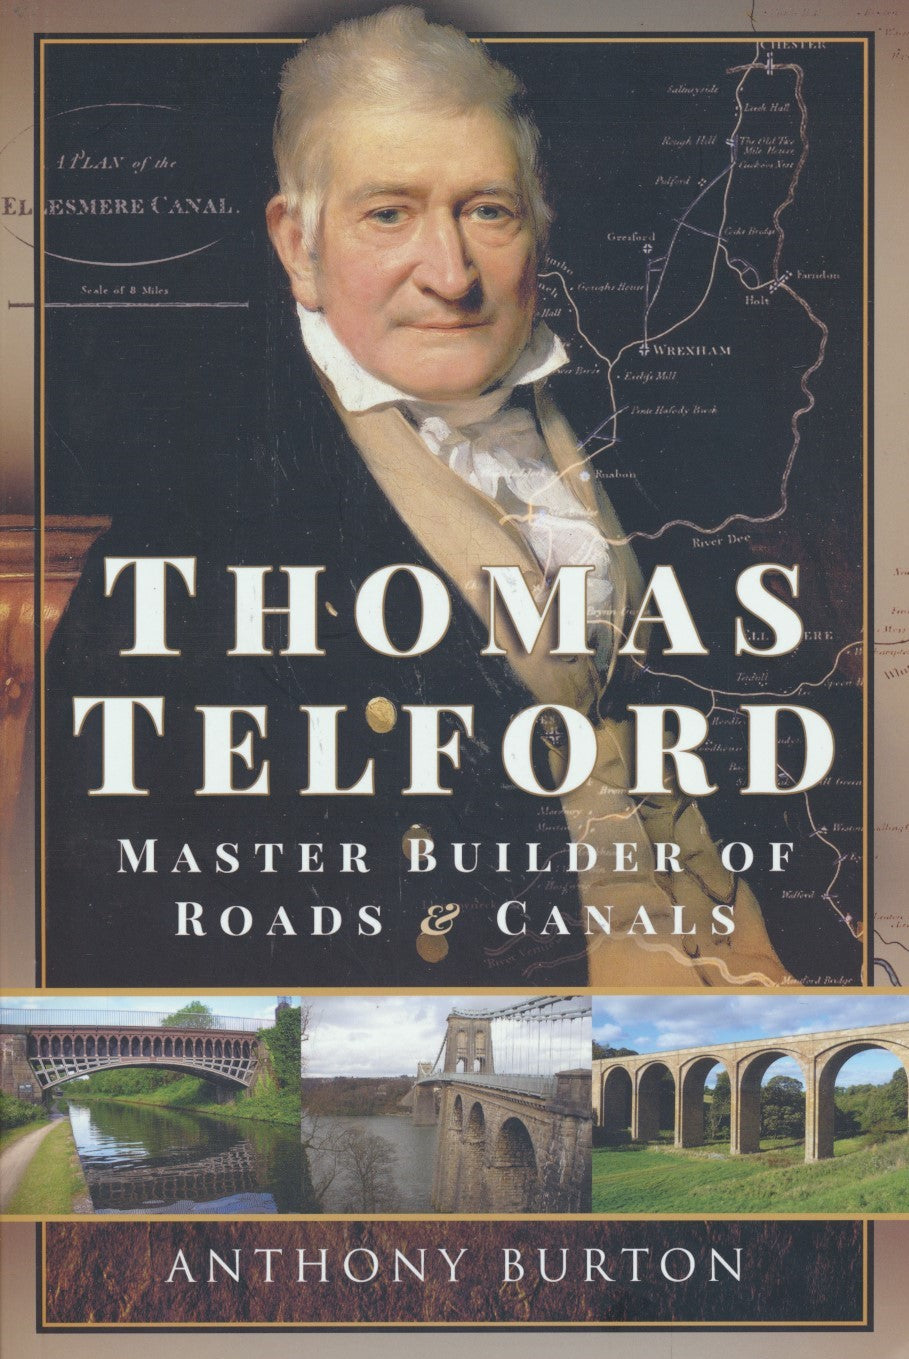 Thomas Telford - Master Builder of Roads and Canals